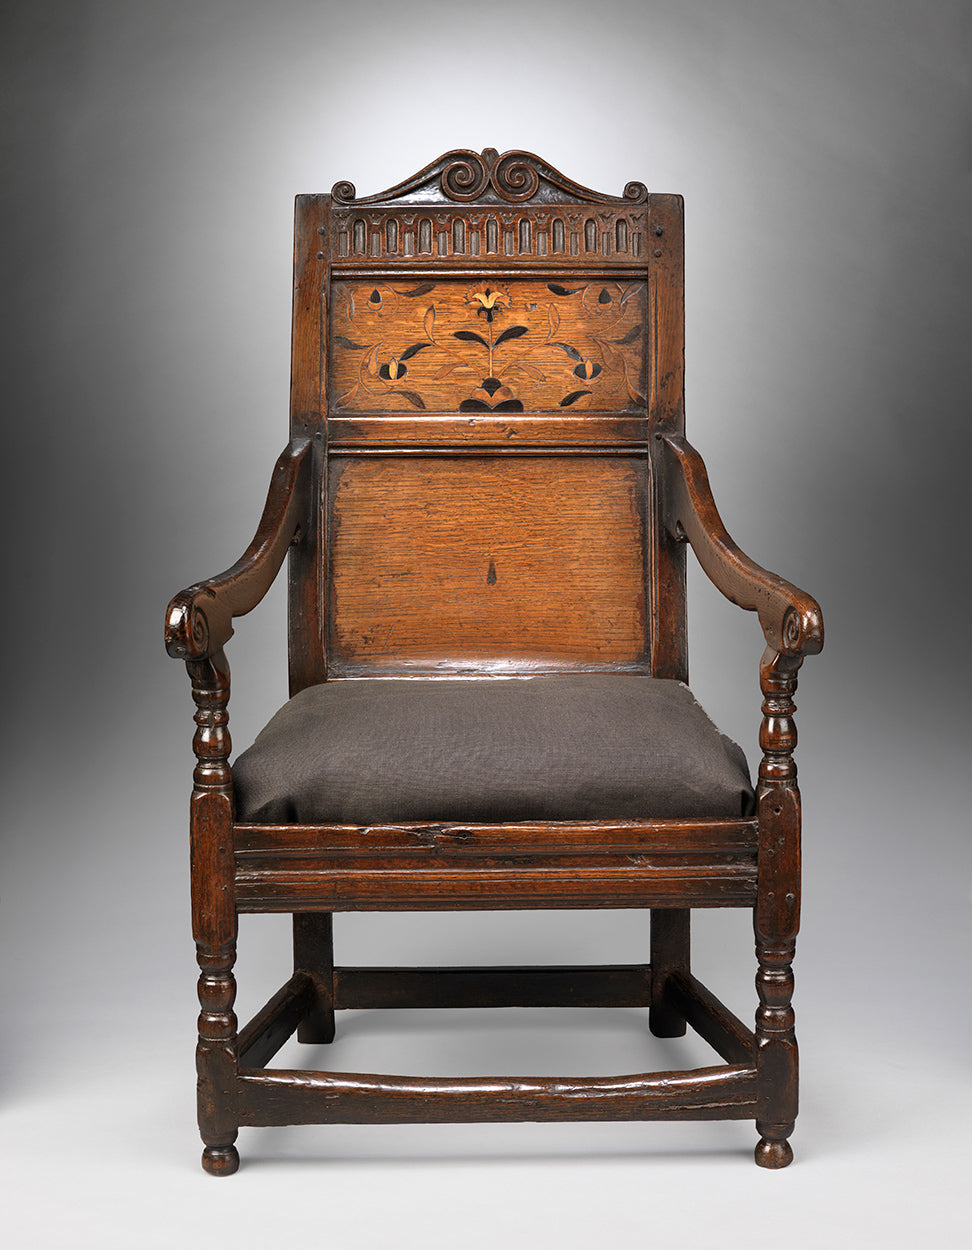 Unusual Twin Ram's Horn Scroll Crested Wainscot Chair